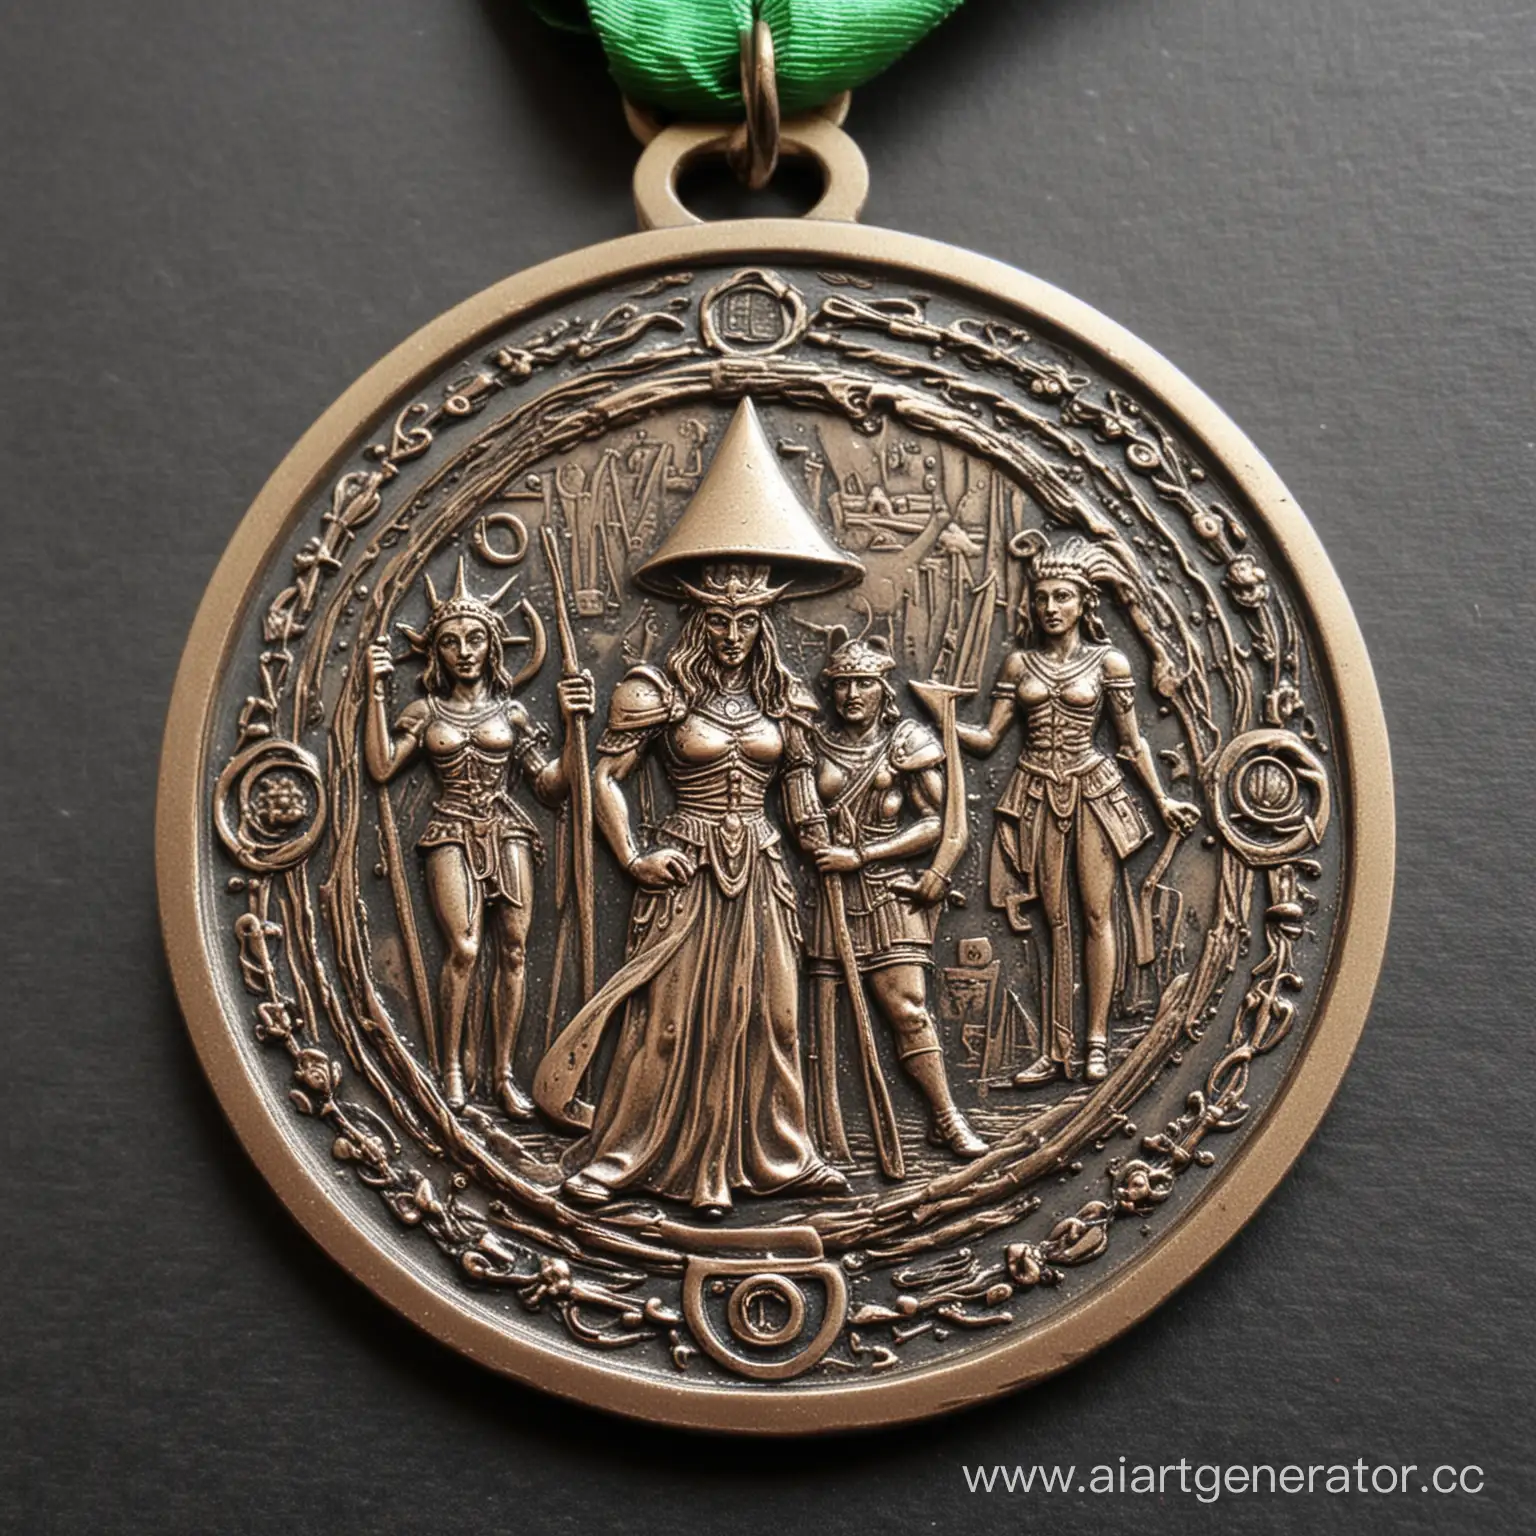 Wizard-Receiving-a-Metal-Medal-in-the-Land-of-Oz-under-the-Watchful-Eye-of-Saturn-and-Hecate